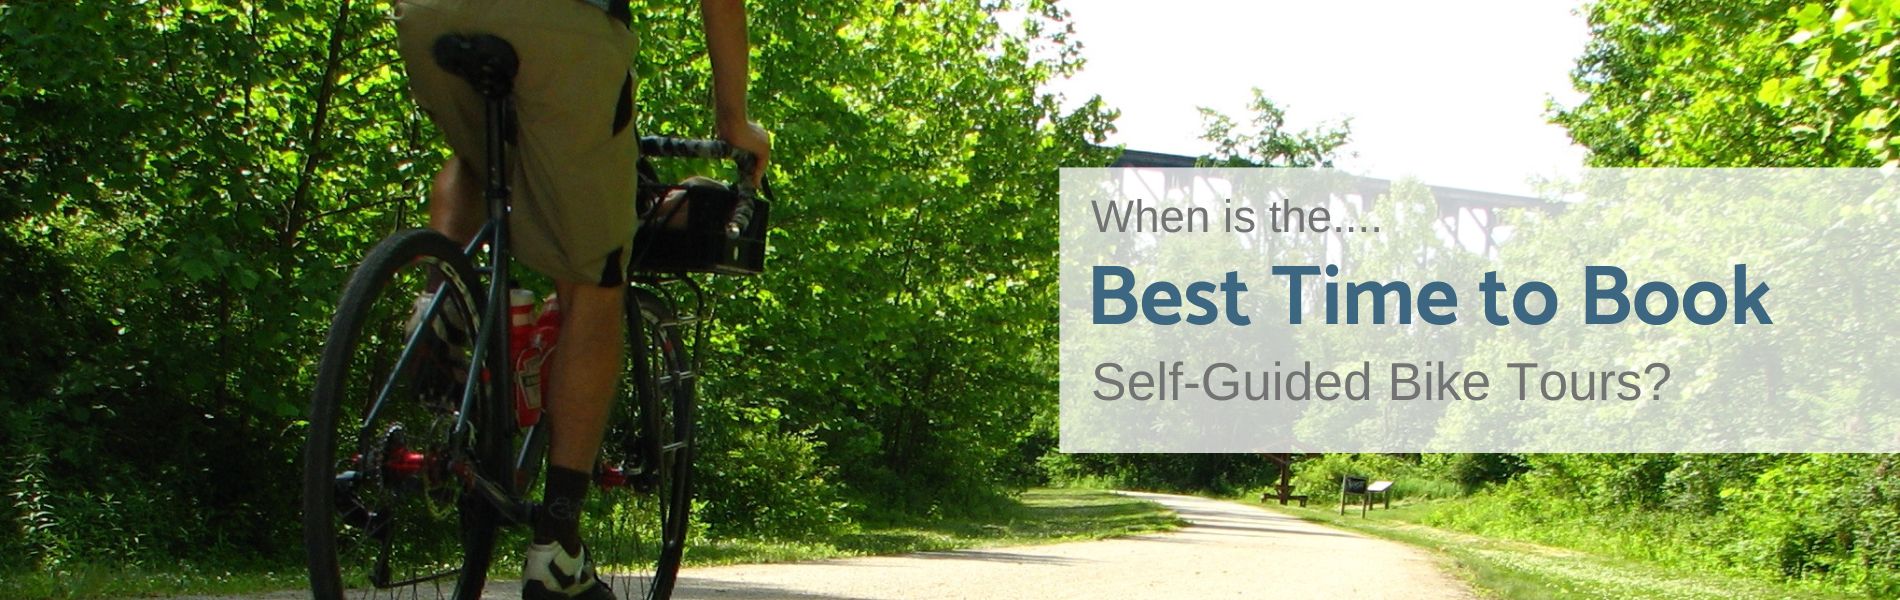 best time to book self guided bike tours